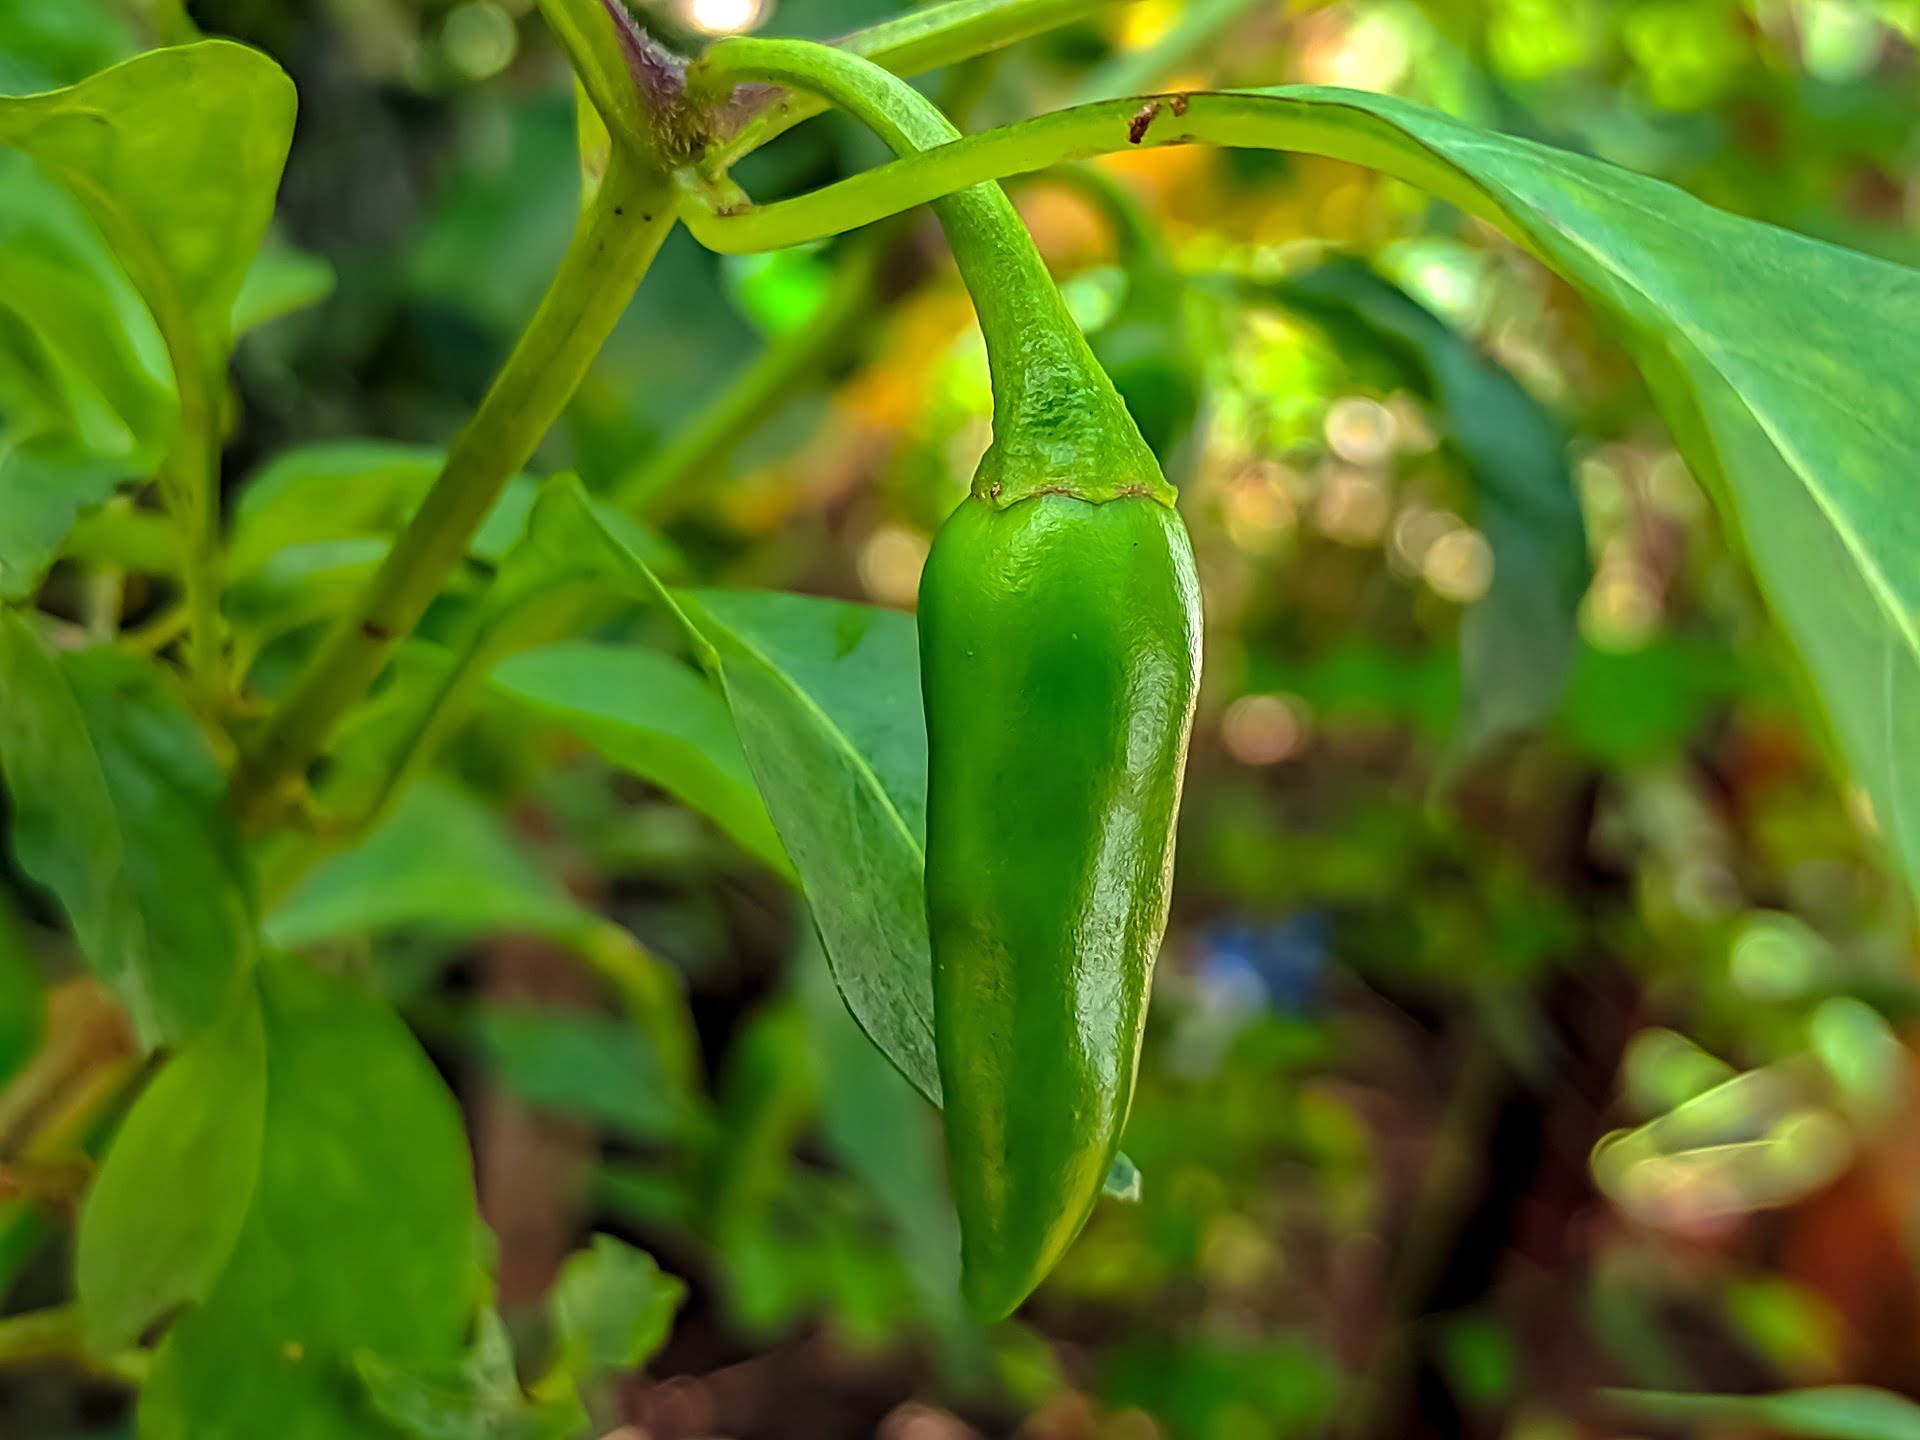 How Many Jalapenos Do The Best Pepper Varieties Produce?